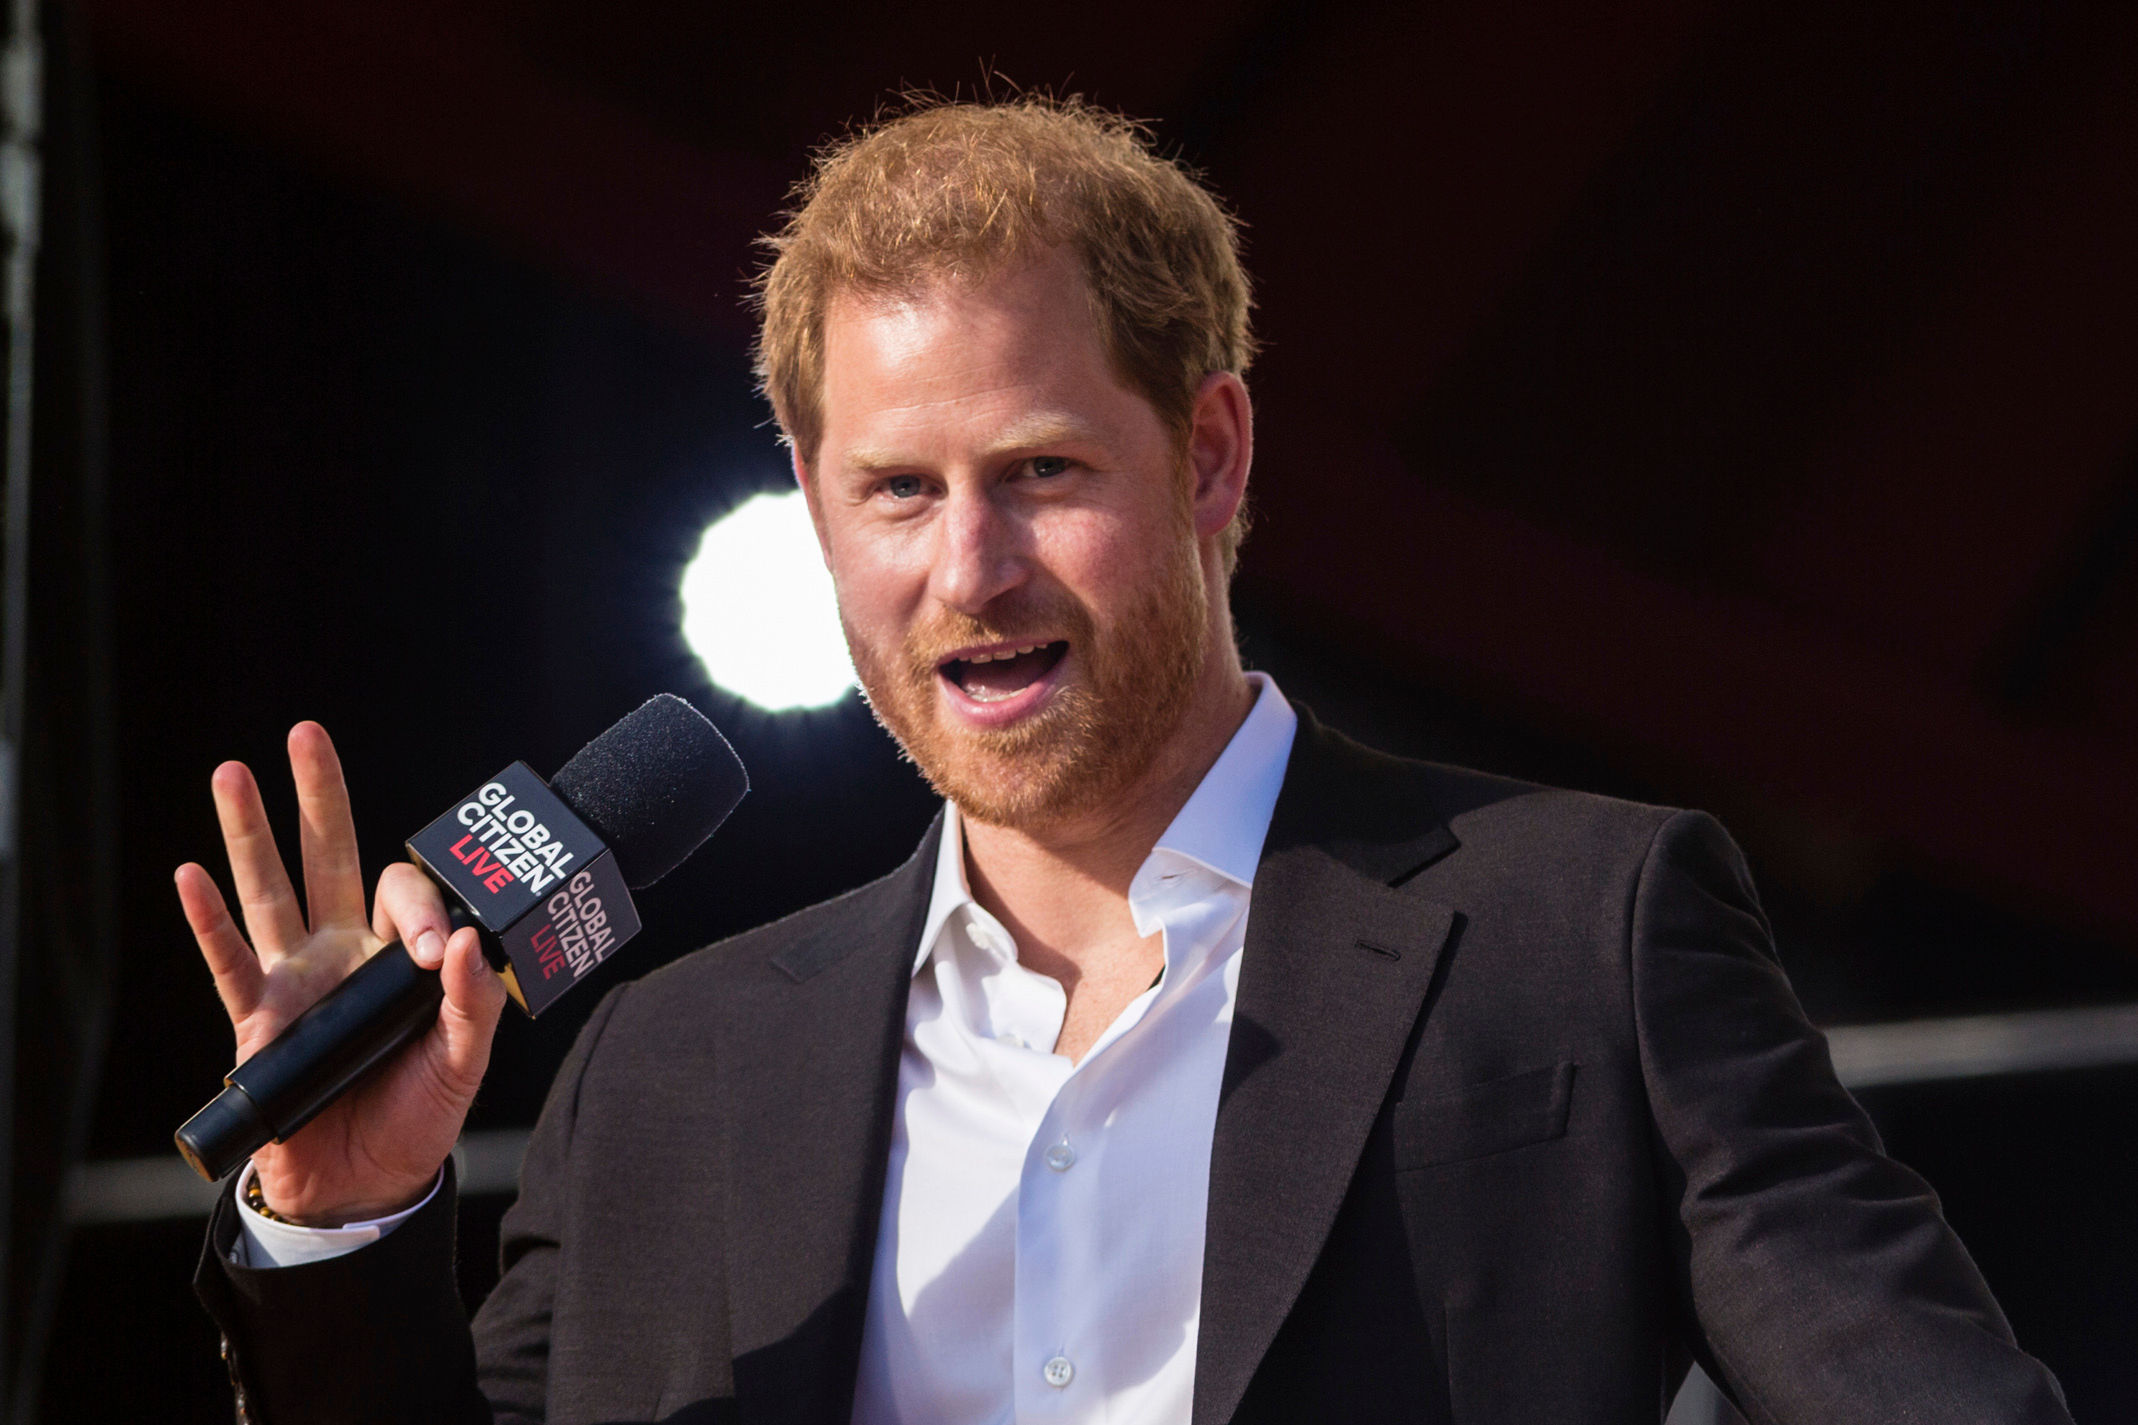 Prince Harry feels bringing kids to UK is unsafe, lawyers say